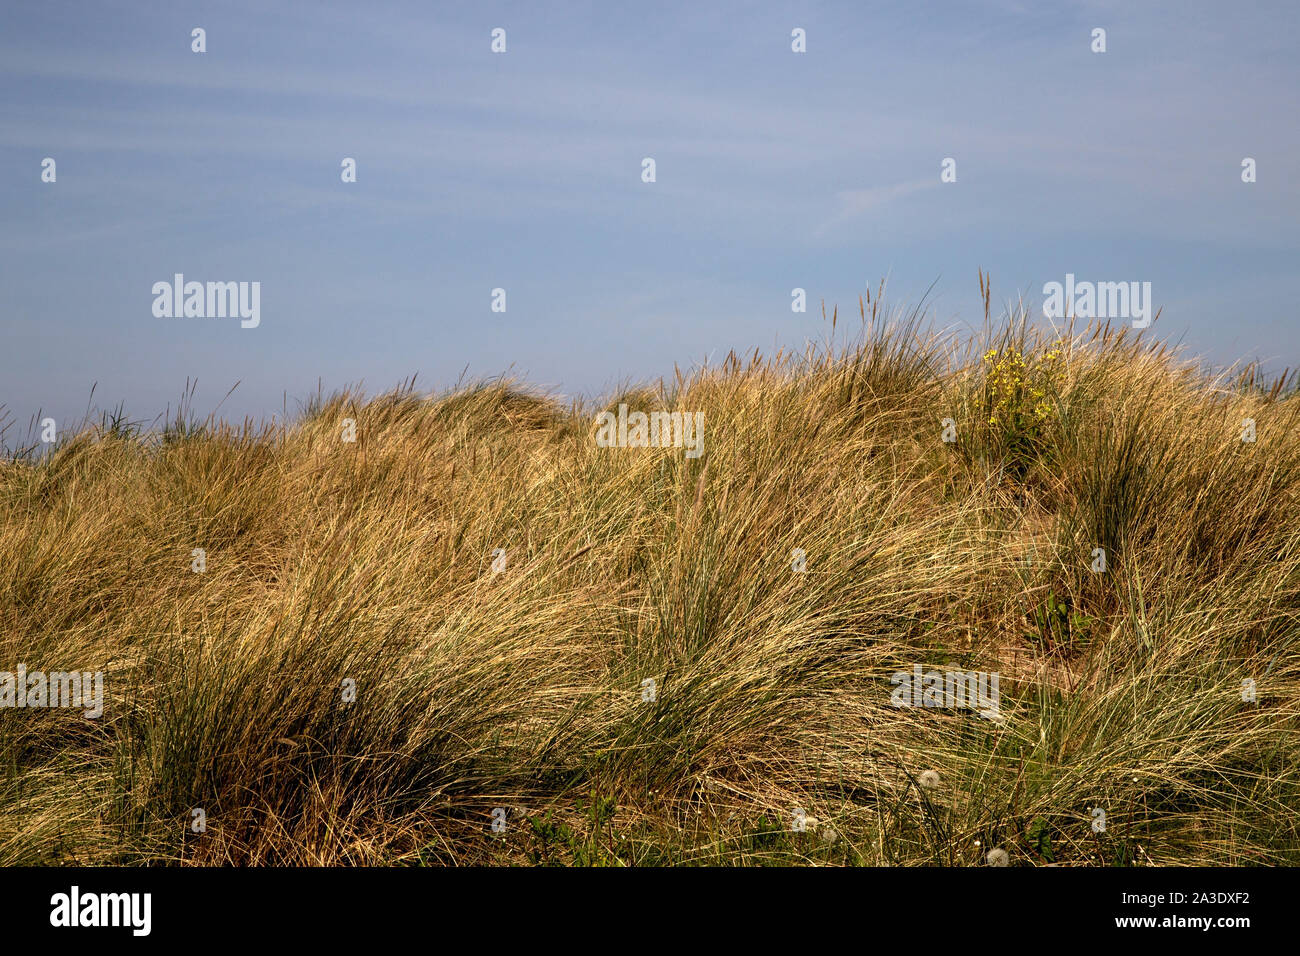 Grass and wild flowers on a sand dune at a coastal location Stock Photo